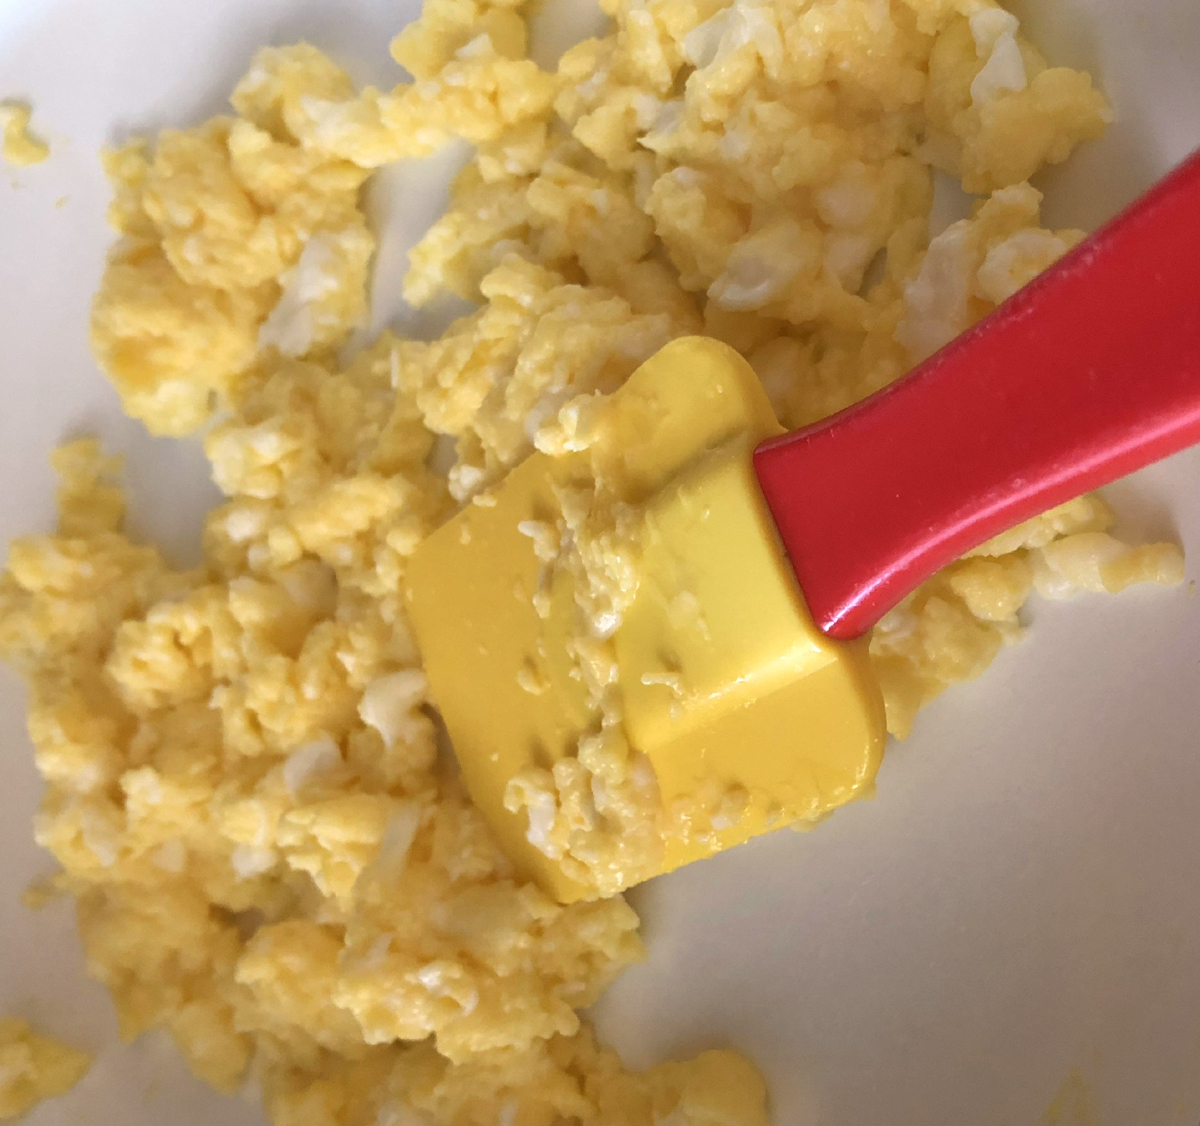 Simple Egg Diets for Dogs